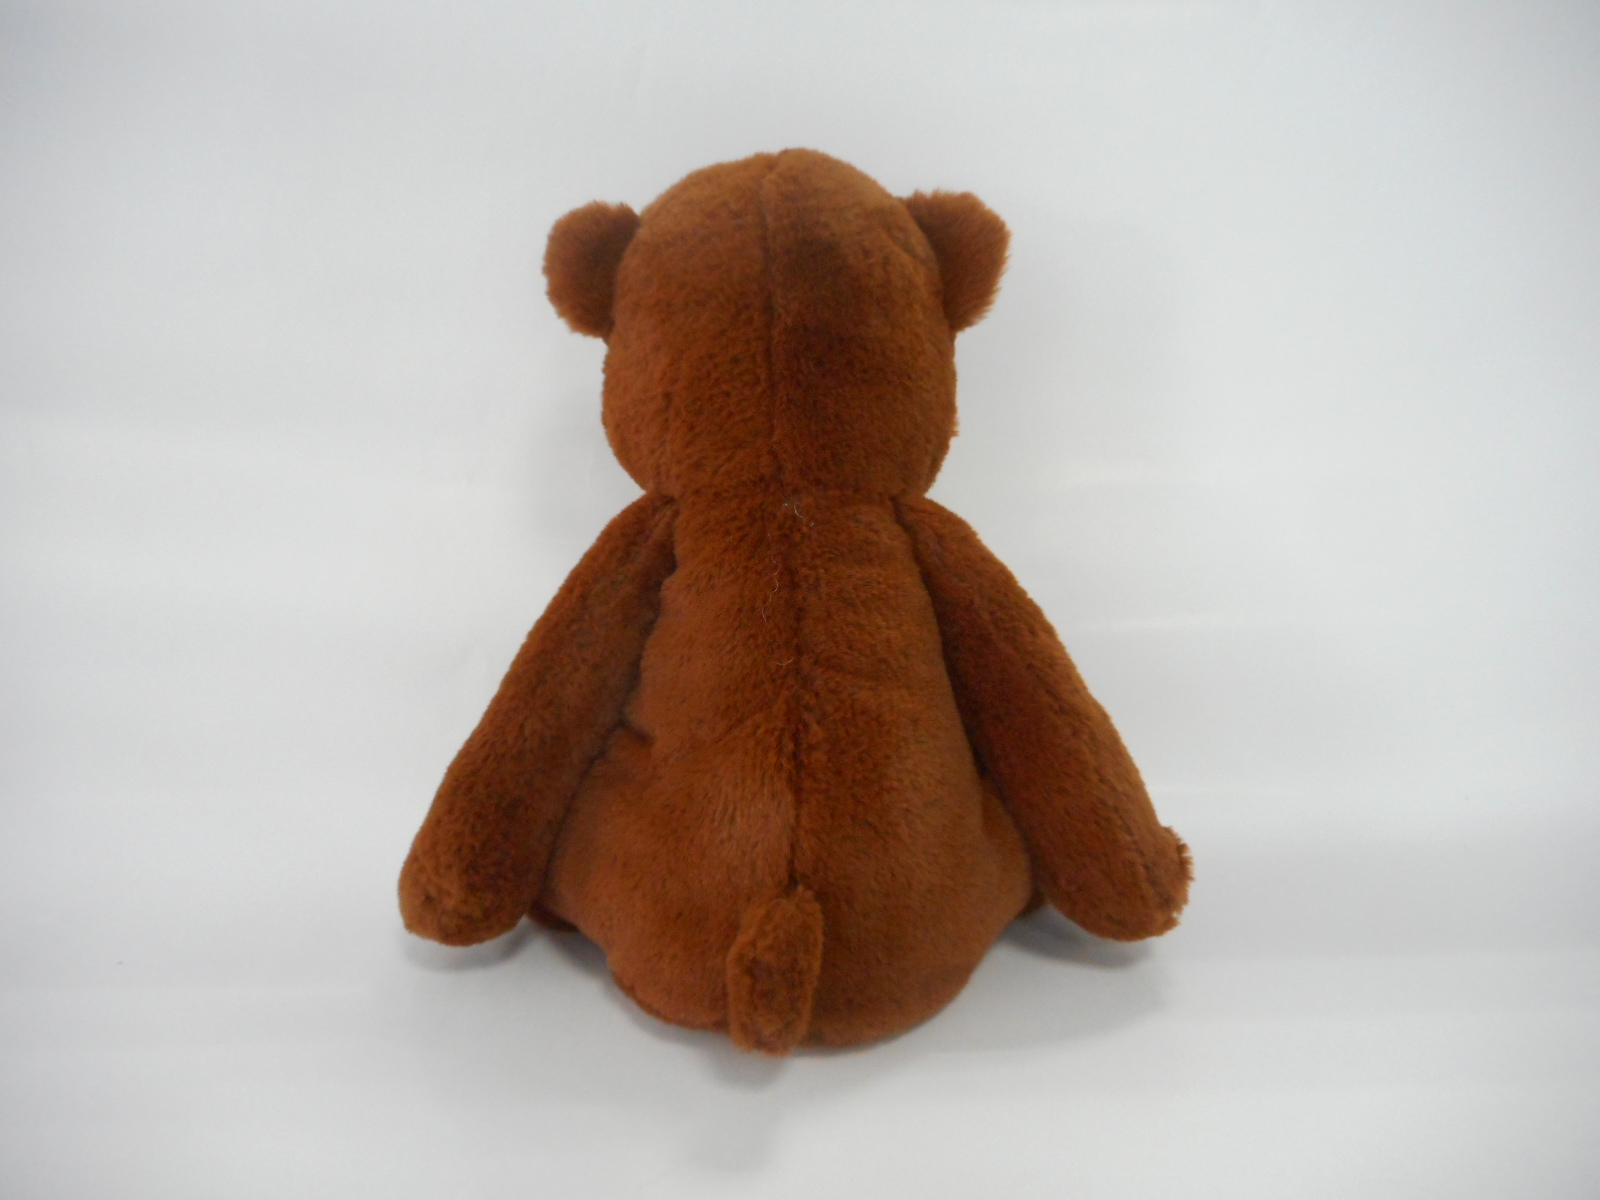 Can Be Customized To Sit on The Wholesale Brown Stuffed Teddy Bear